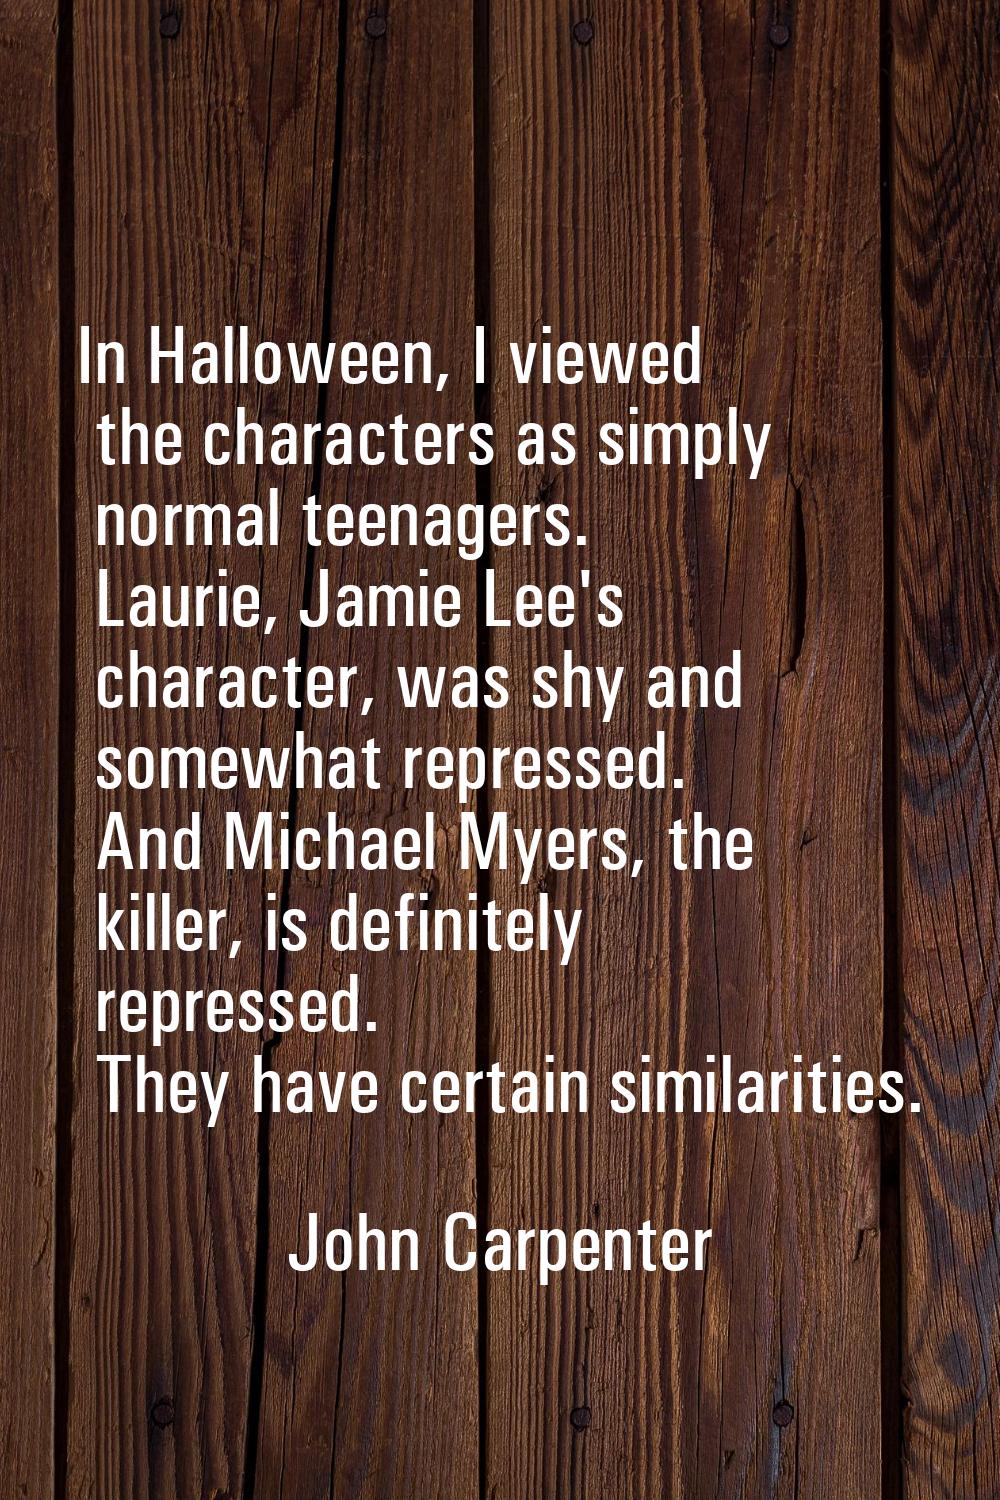 In Halloween, I viewed the characters as simply normal teenagers. Laurie, Jamie Lee's character, wa